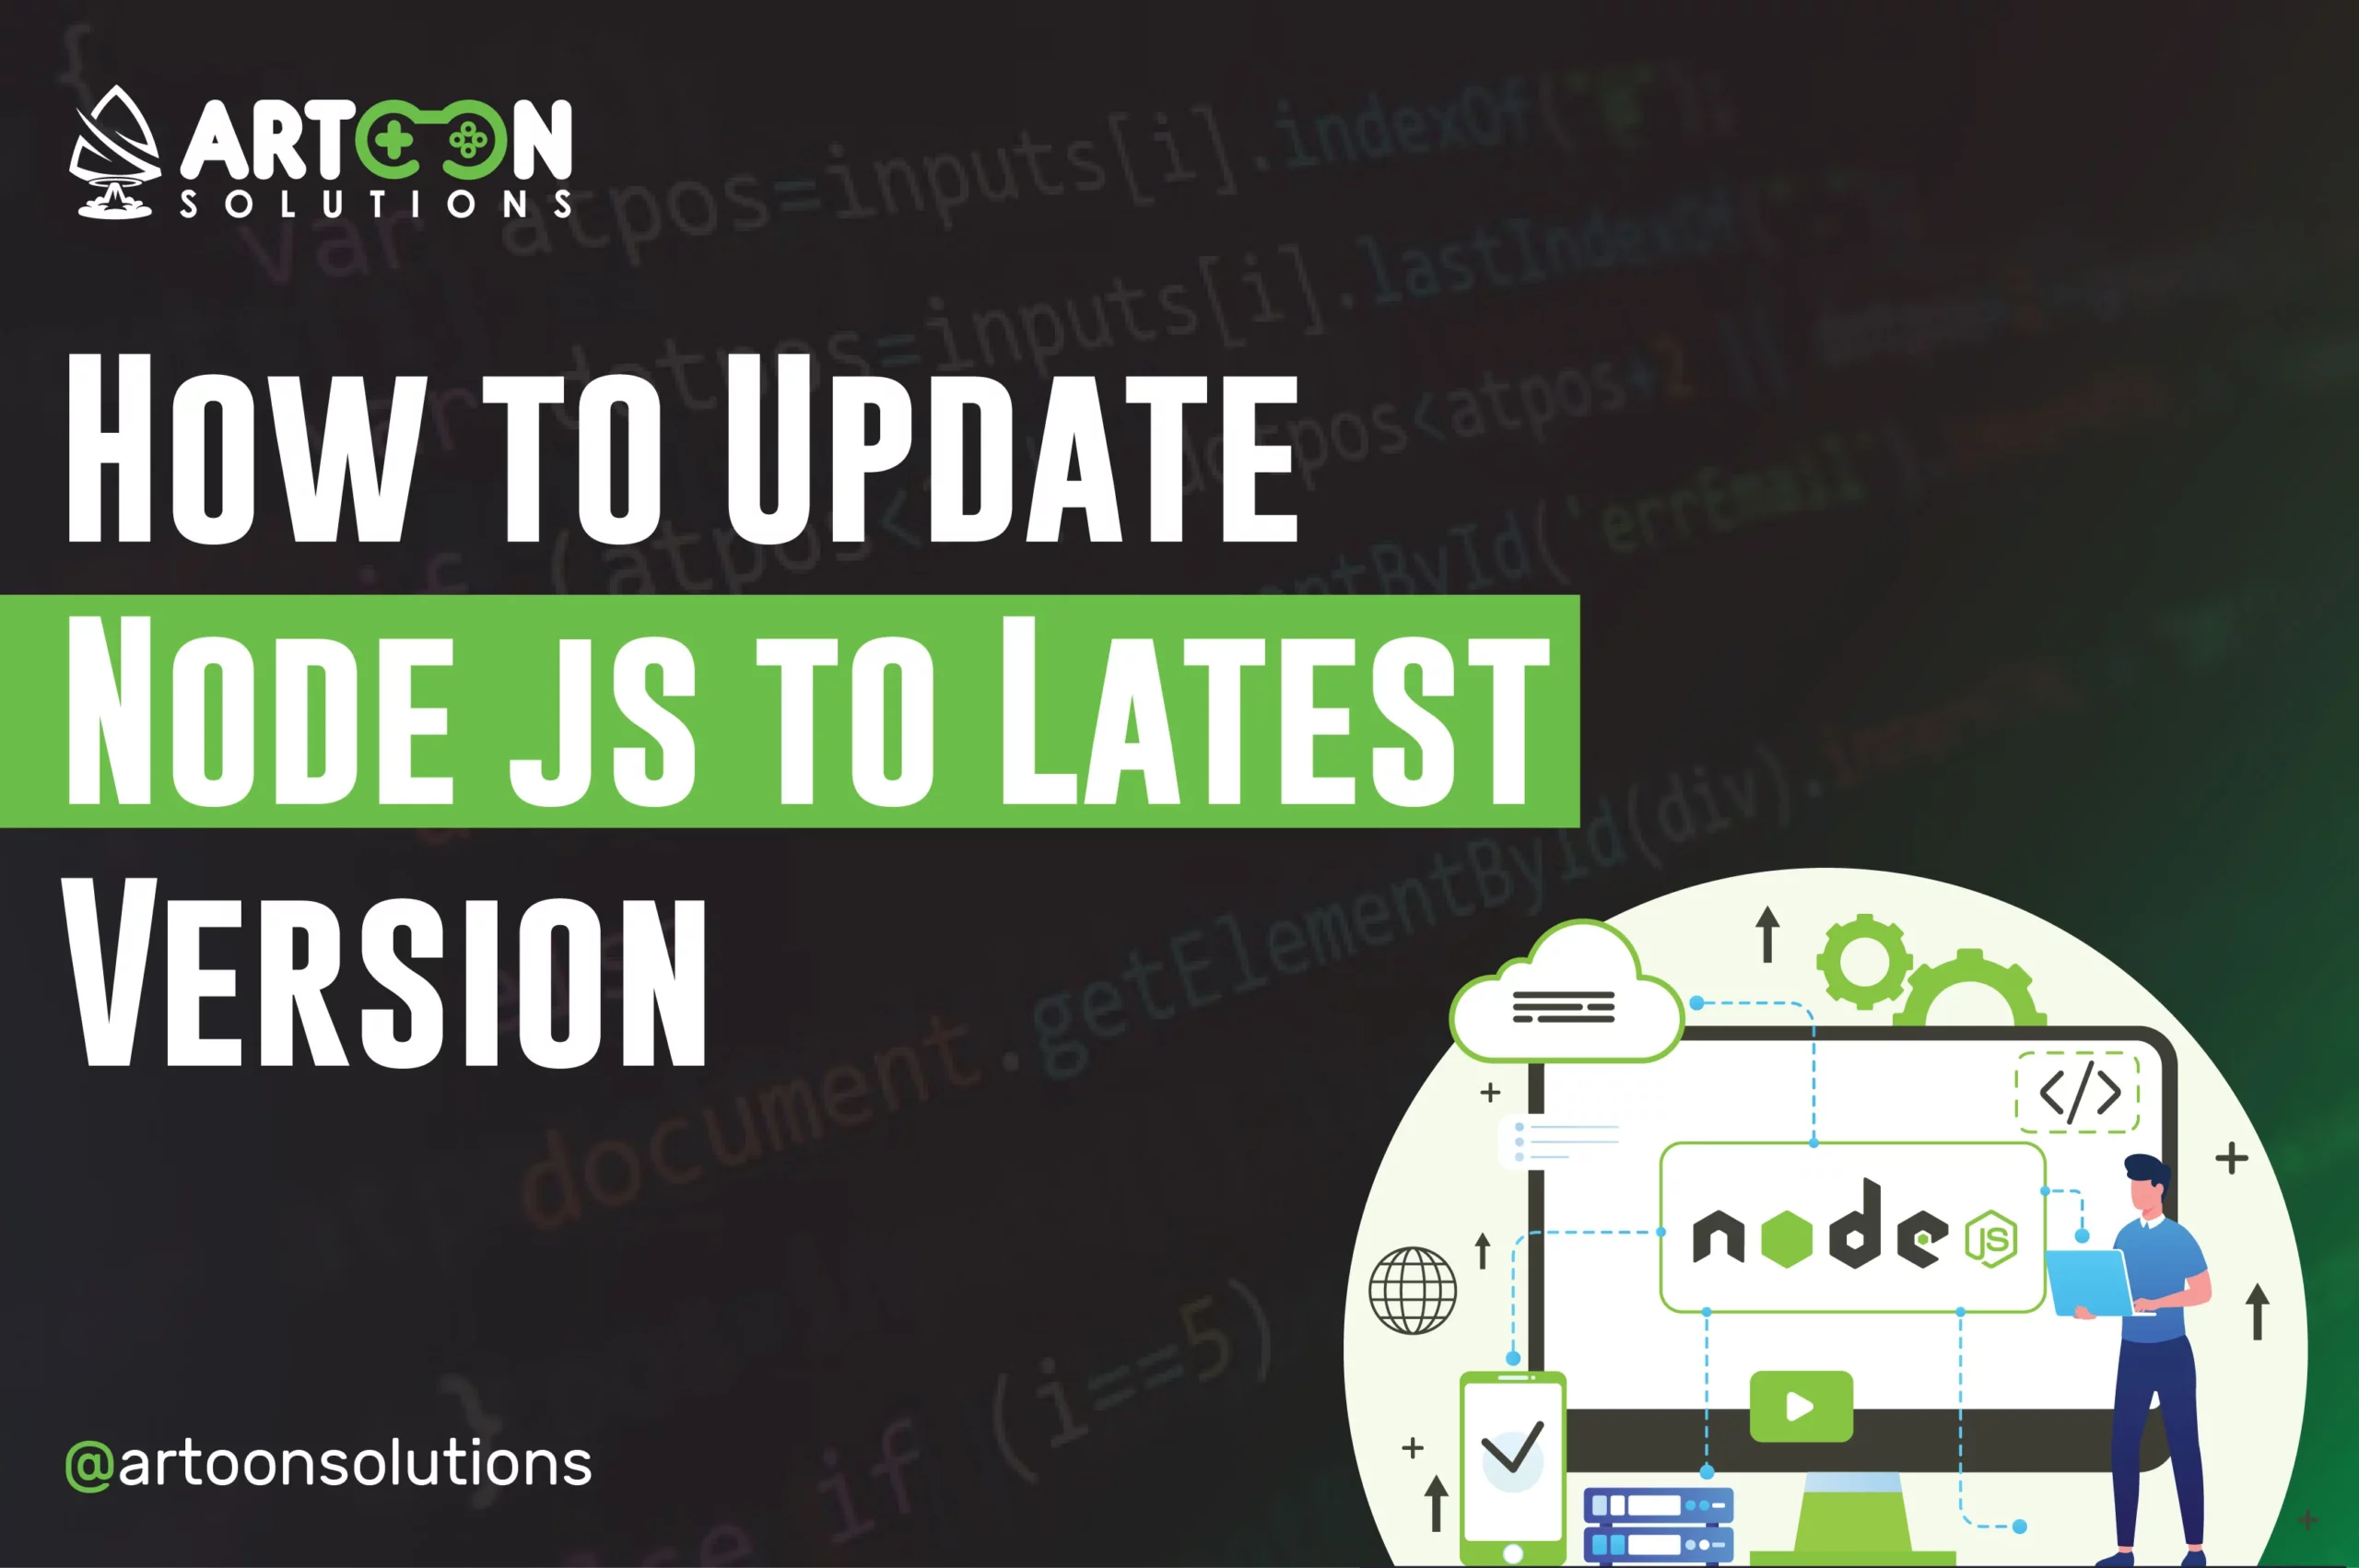 How to Update Node js to Latest Version